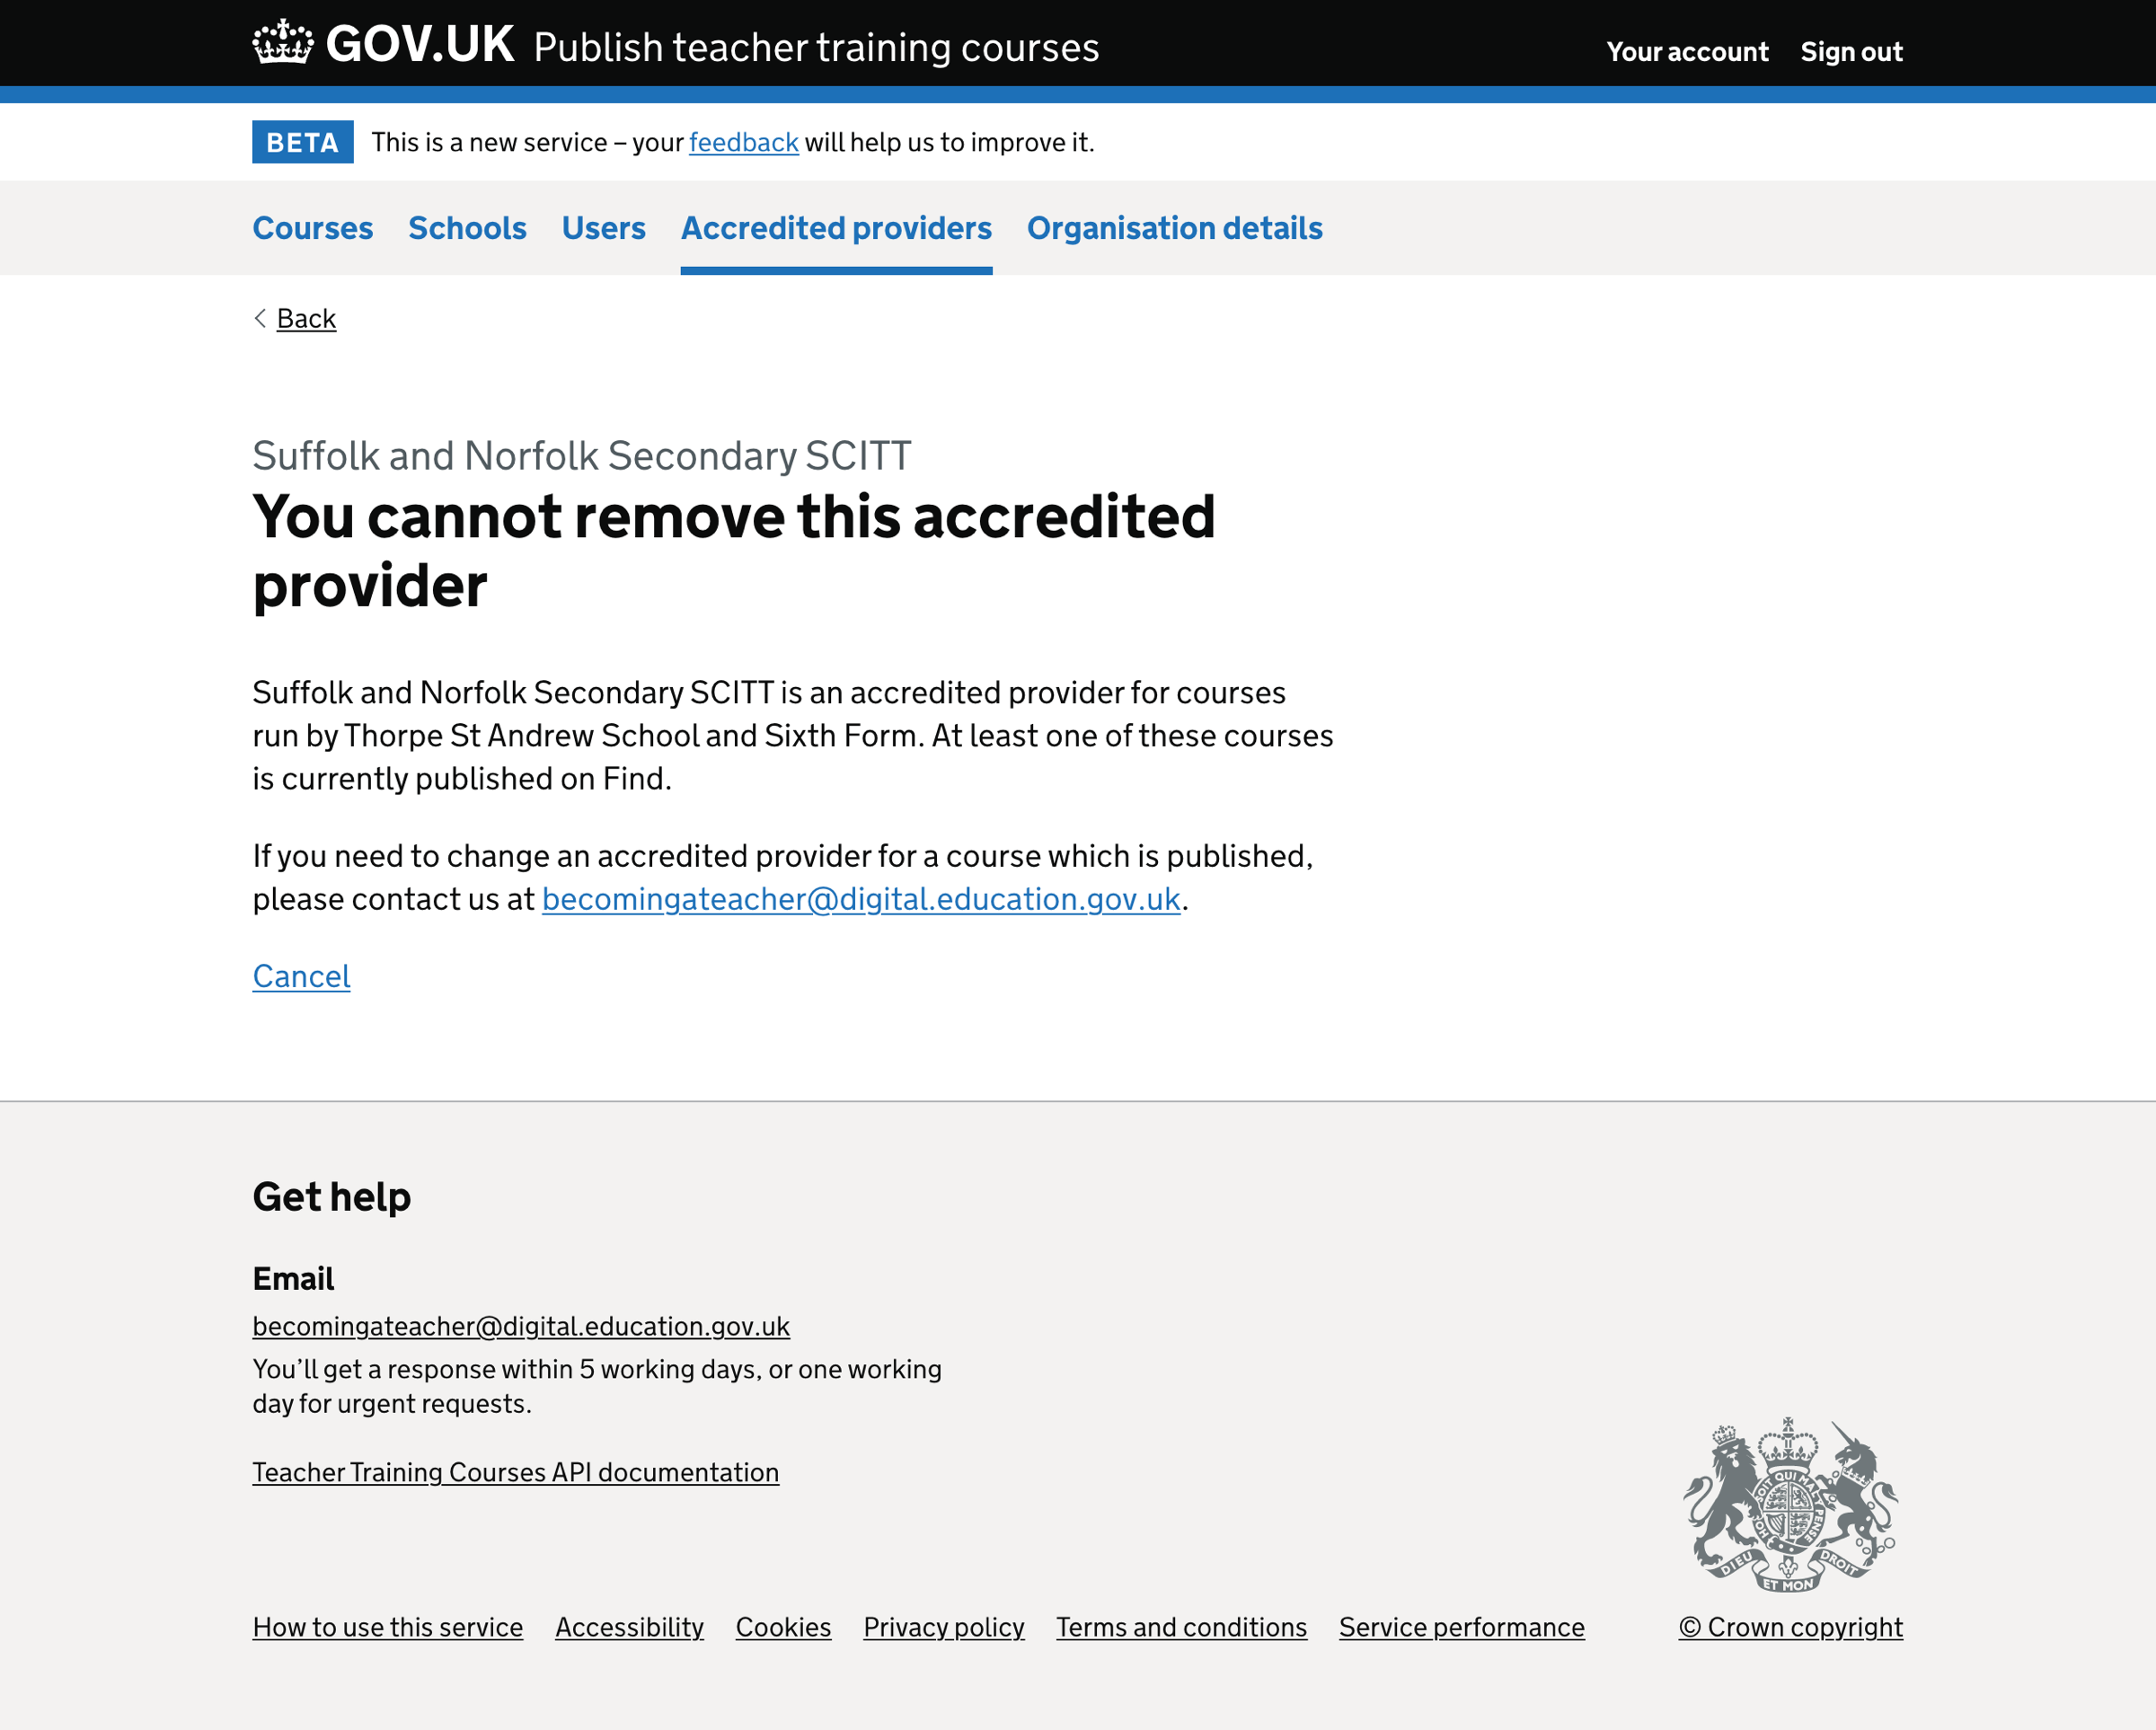 Screenshot of Accredited provider cannot be removed